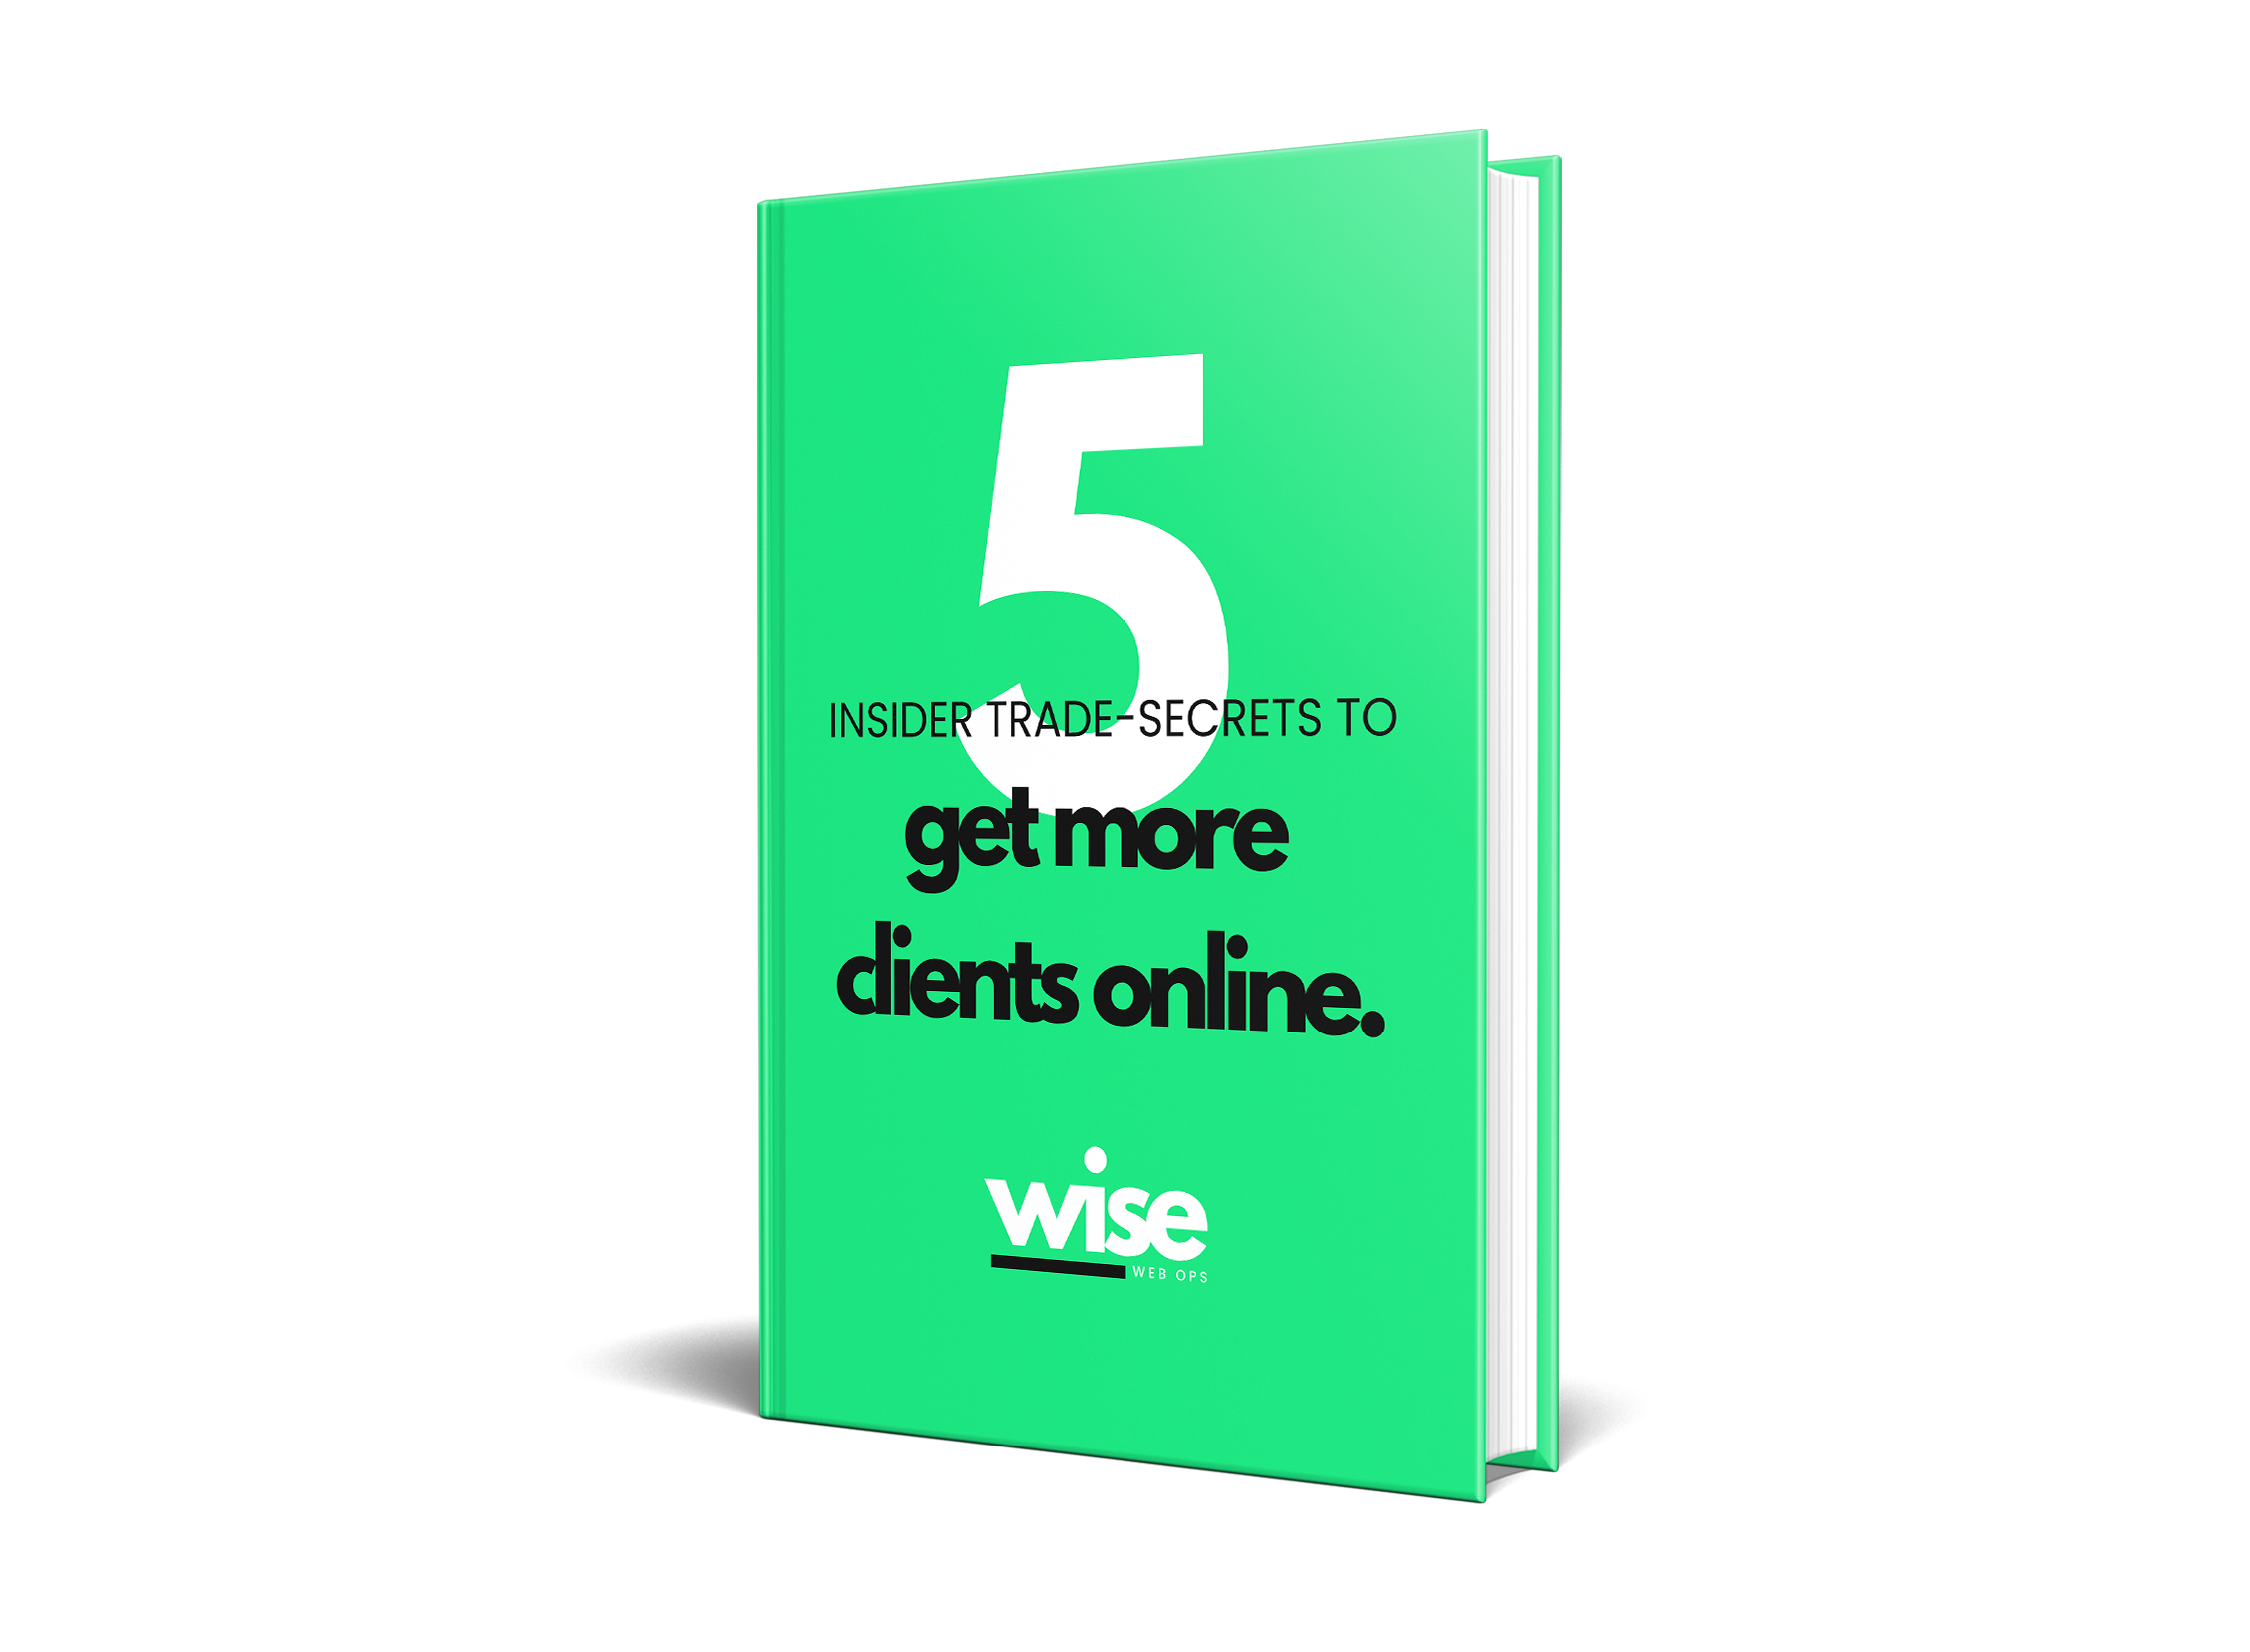 Photo of our green hardcover book "5 Insider Trade-Secrets To Get More Clients Online".